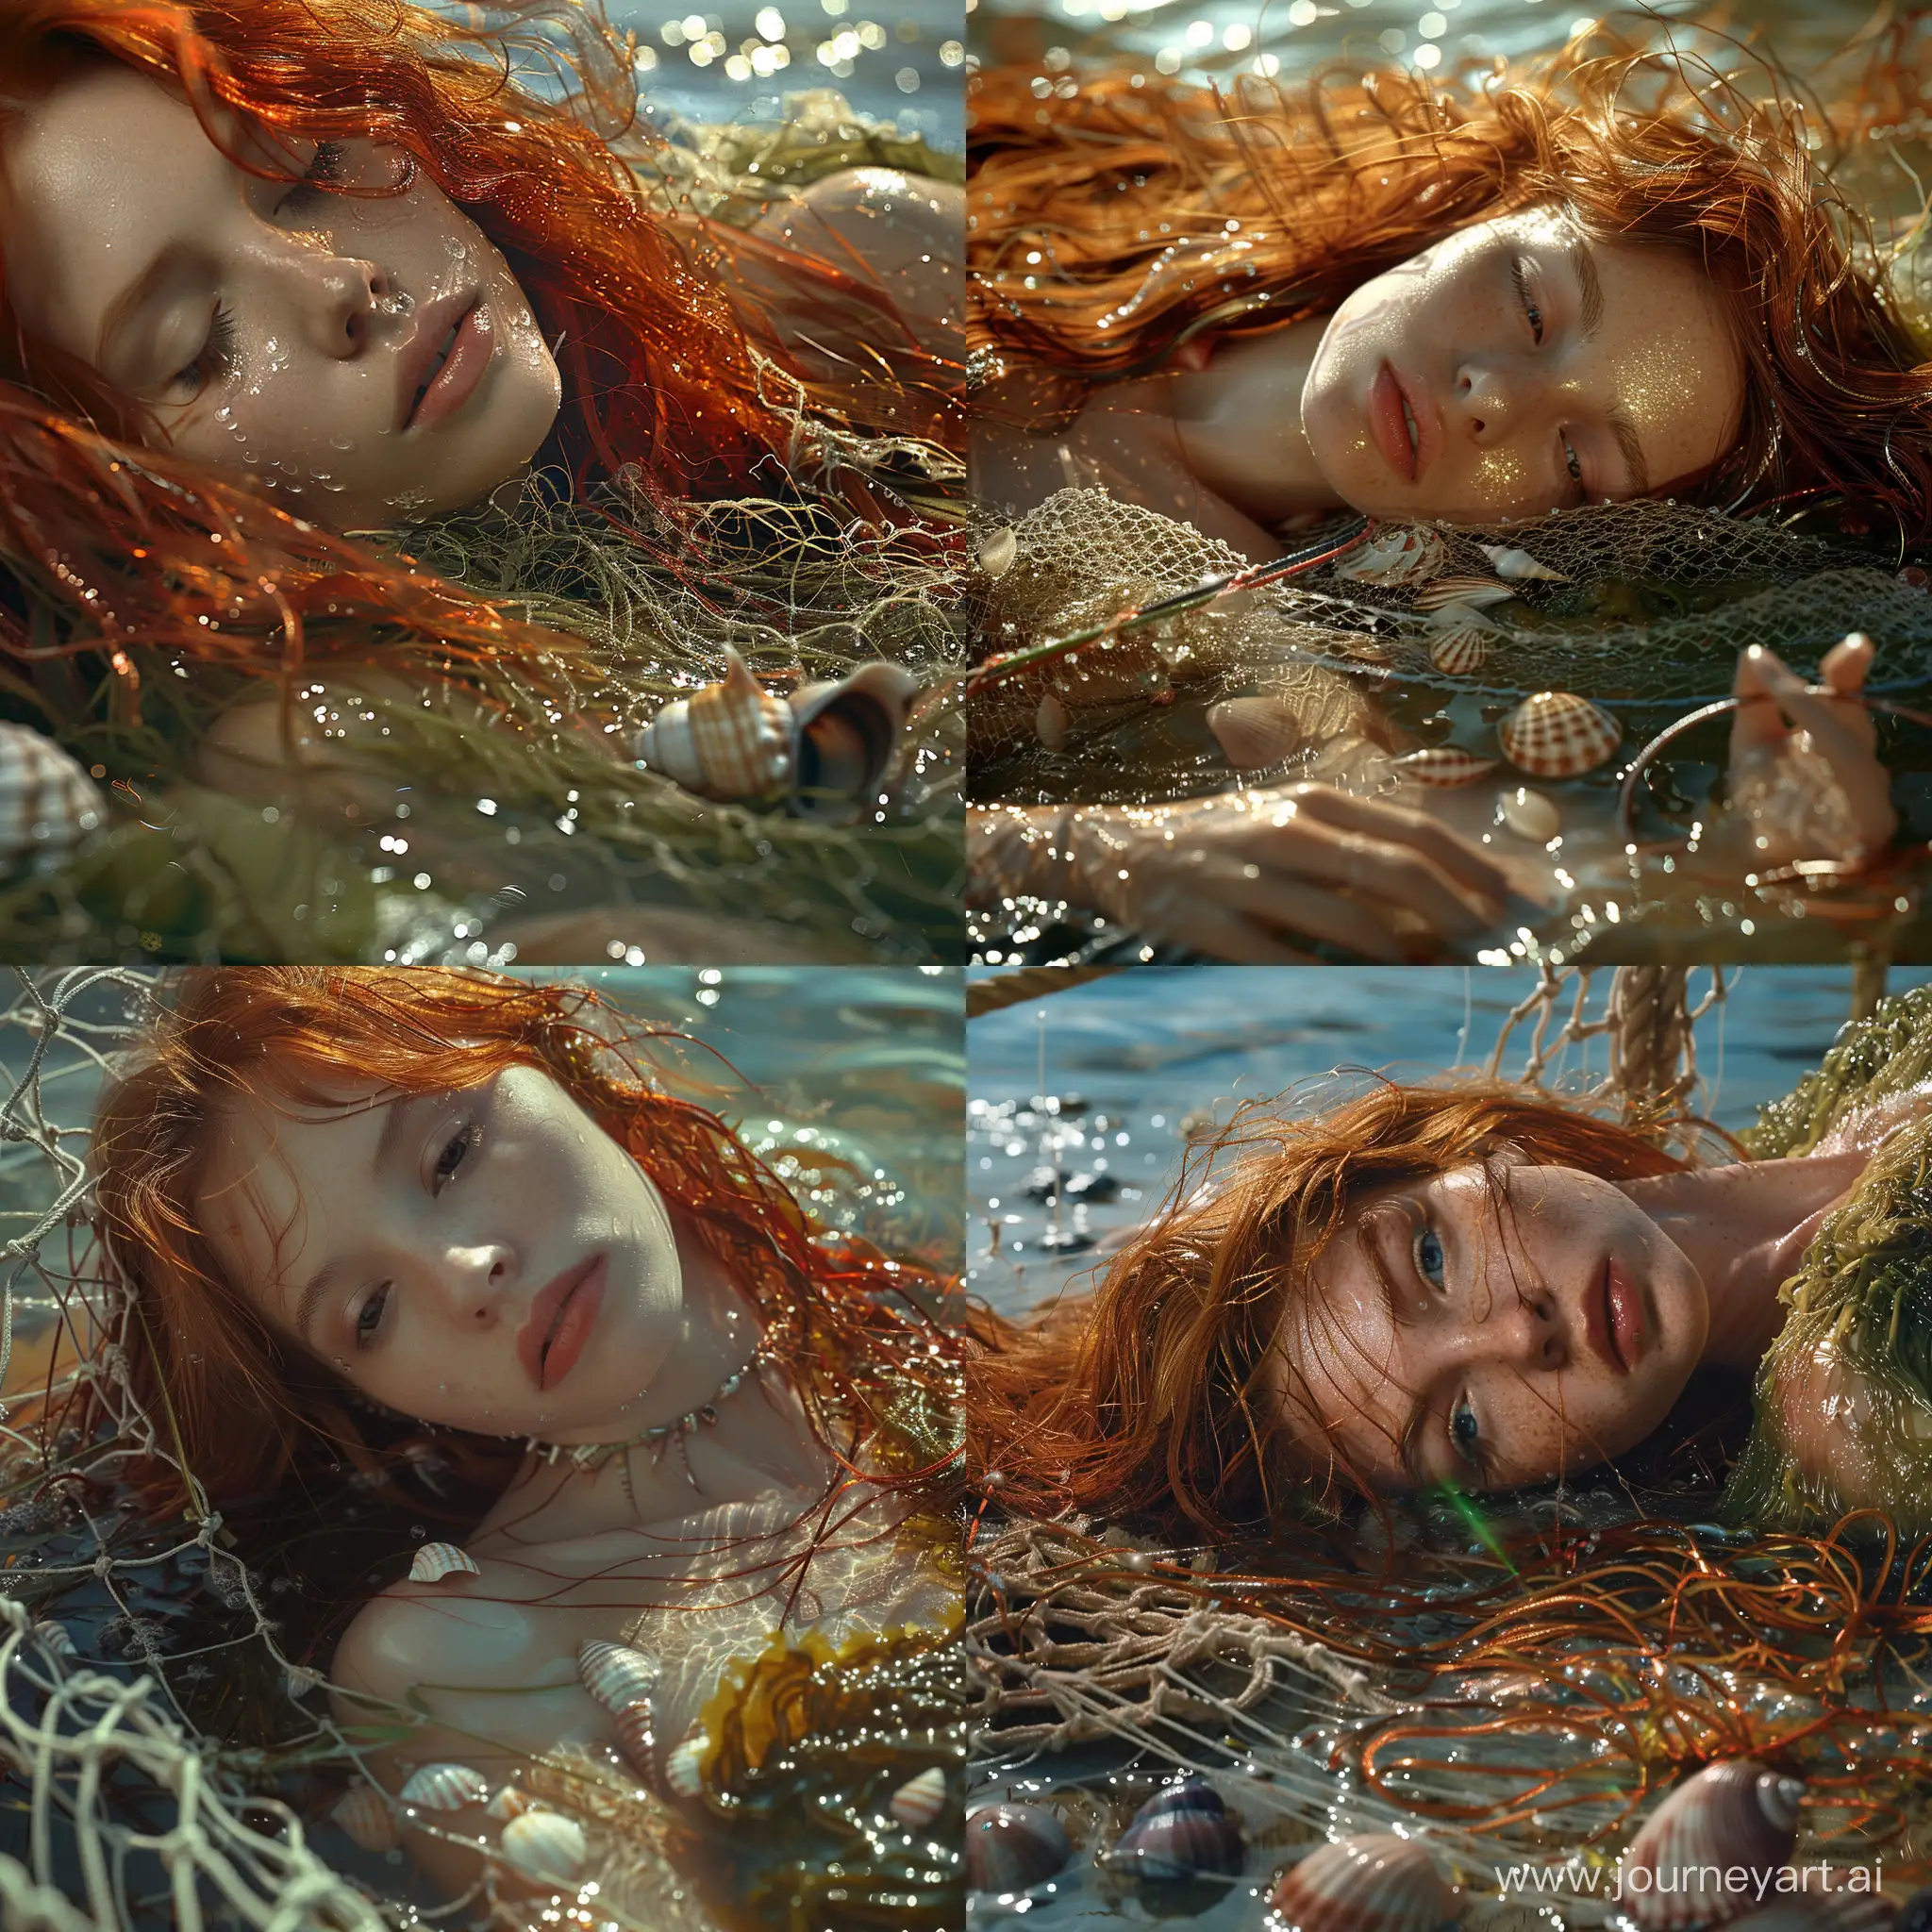 close-up of a girl with long red hair in a seaweed dress lying on the ocean floor, shimmer, glare, shells, fishing net, wet hair. V6